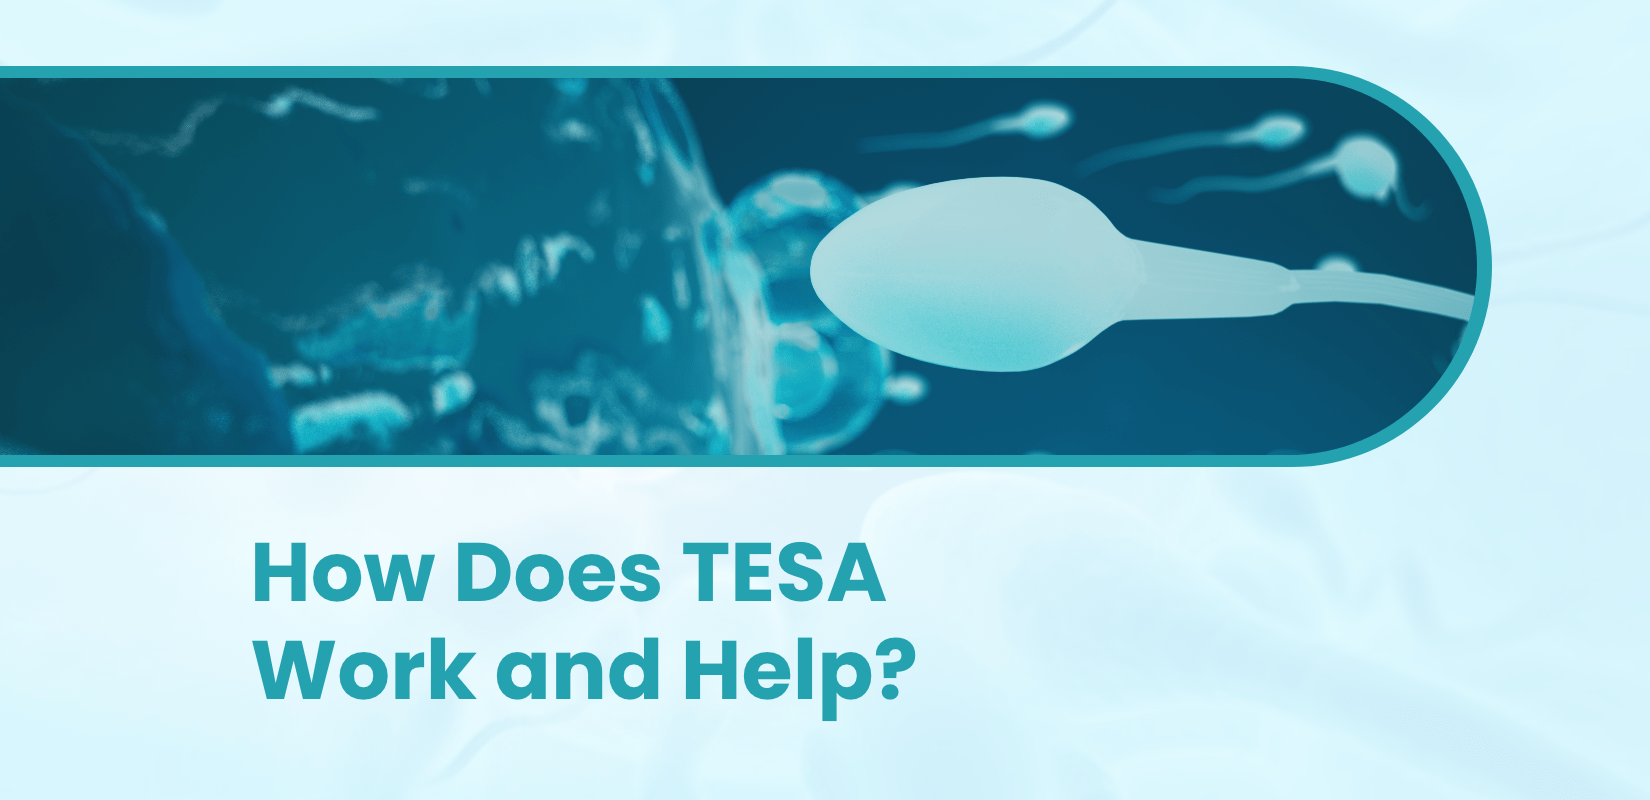 How Does TESA Work and Help?